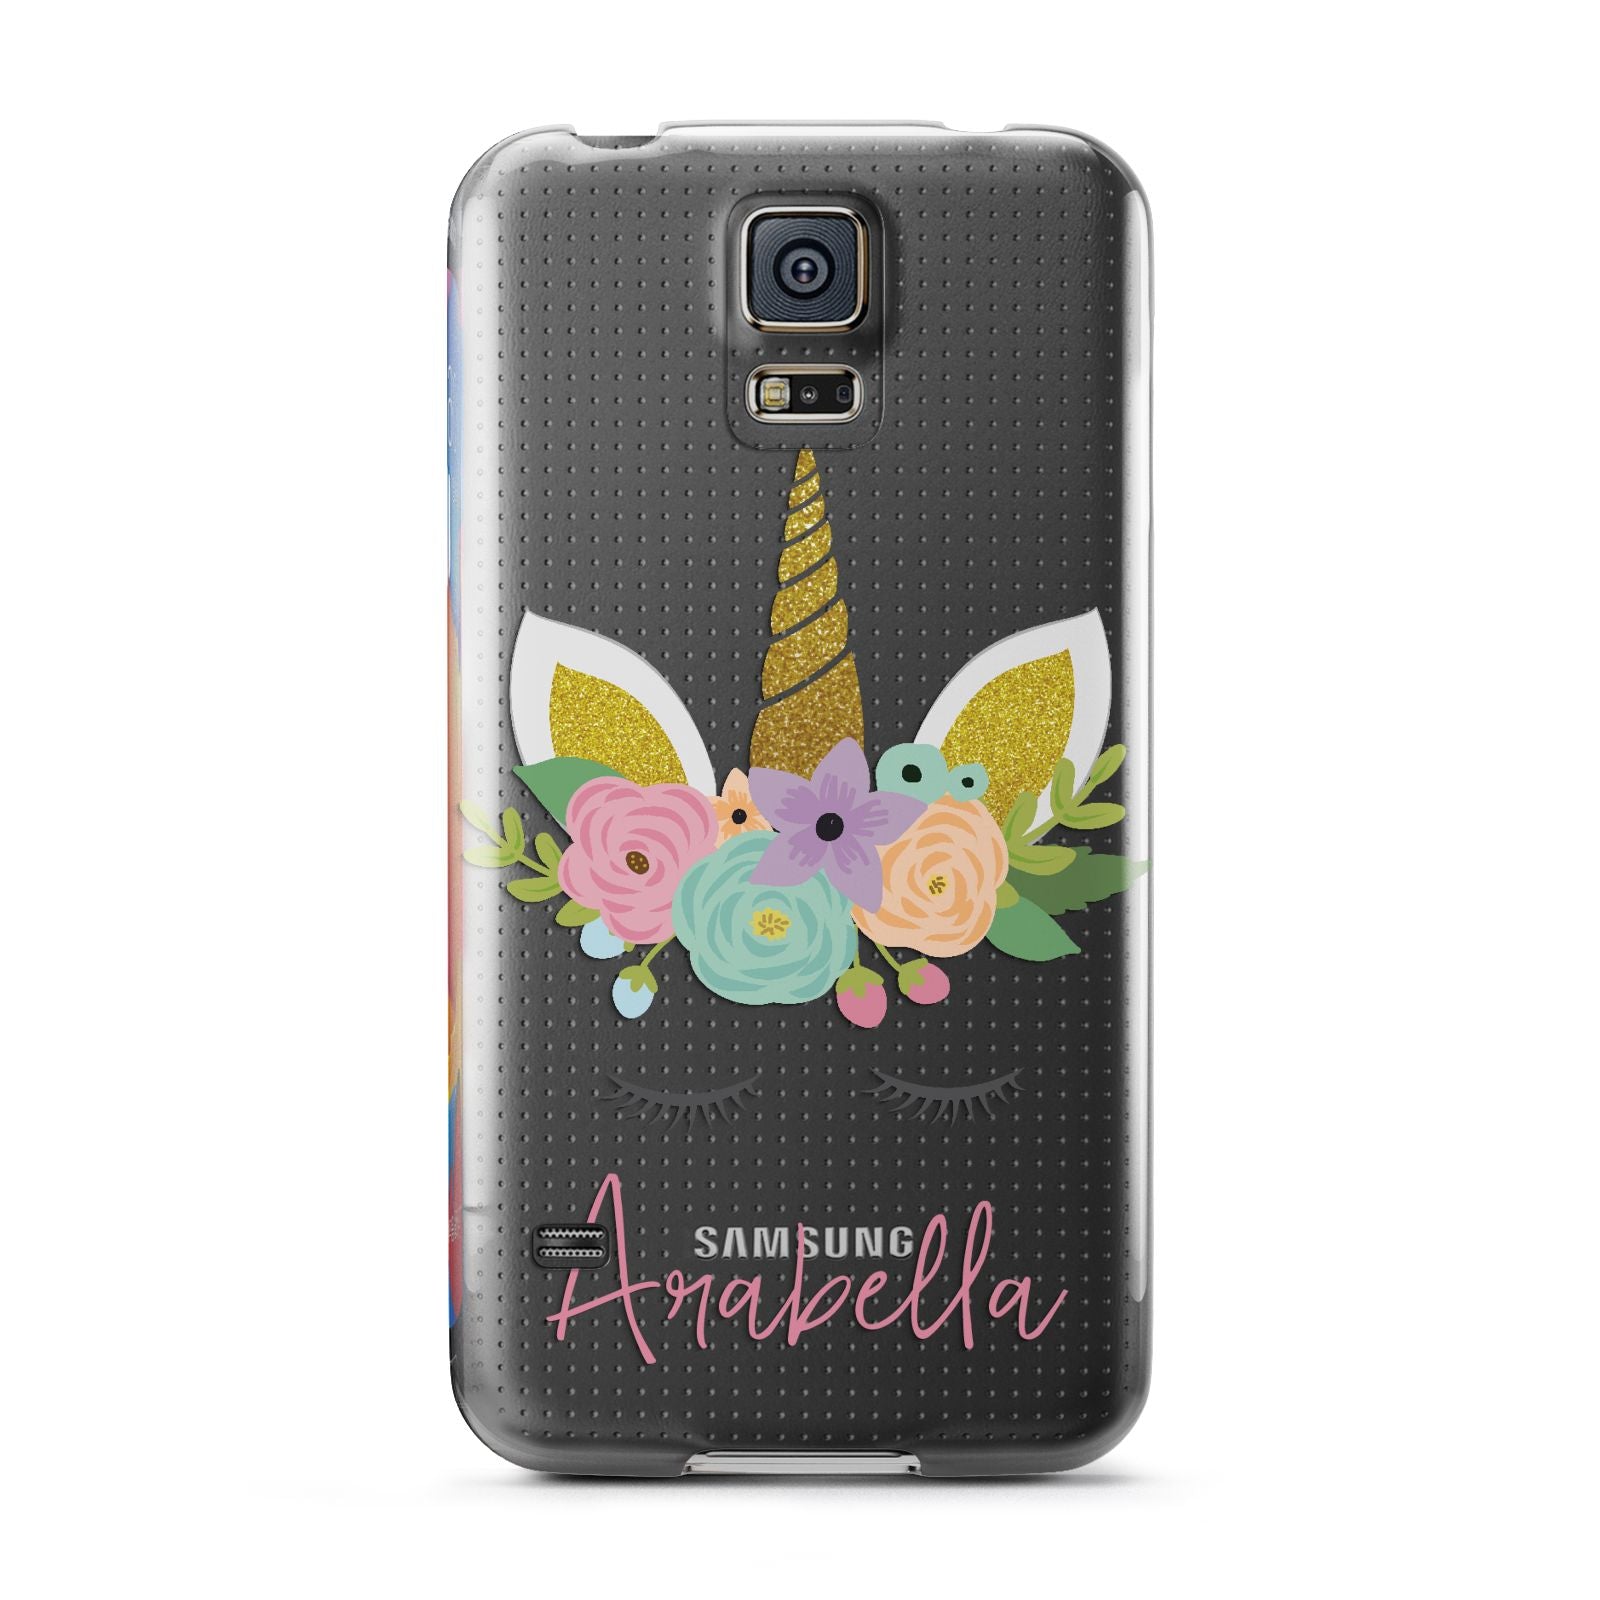 Personalised Unicorn Face Samsung Galaxy S5 Case